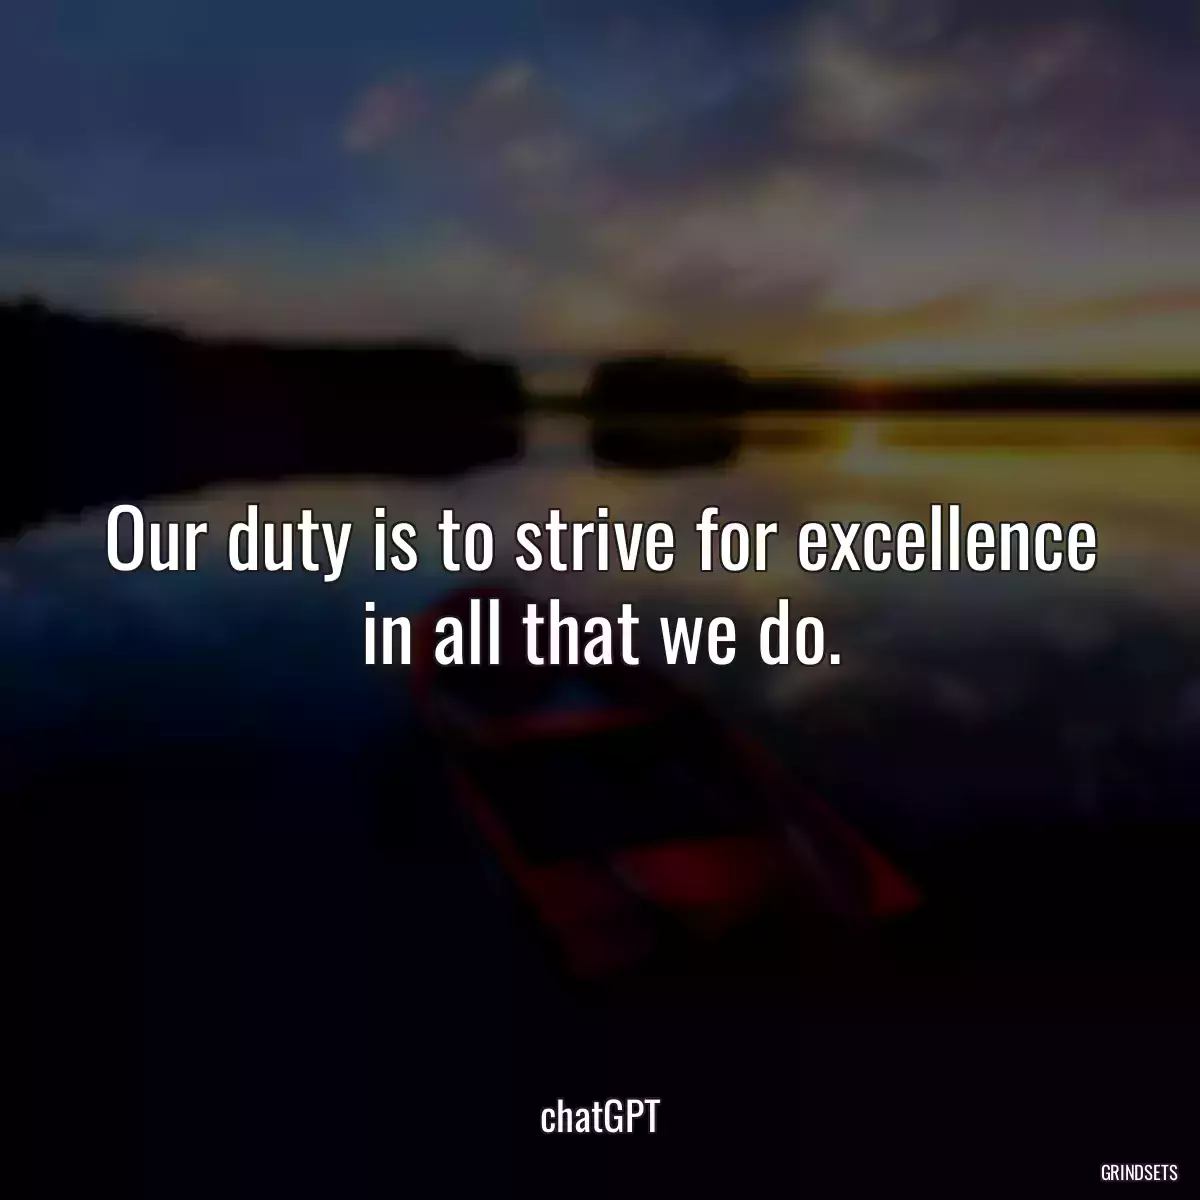 Our duty is to strive for excellence in all that we do.